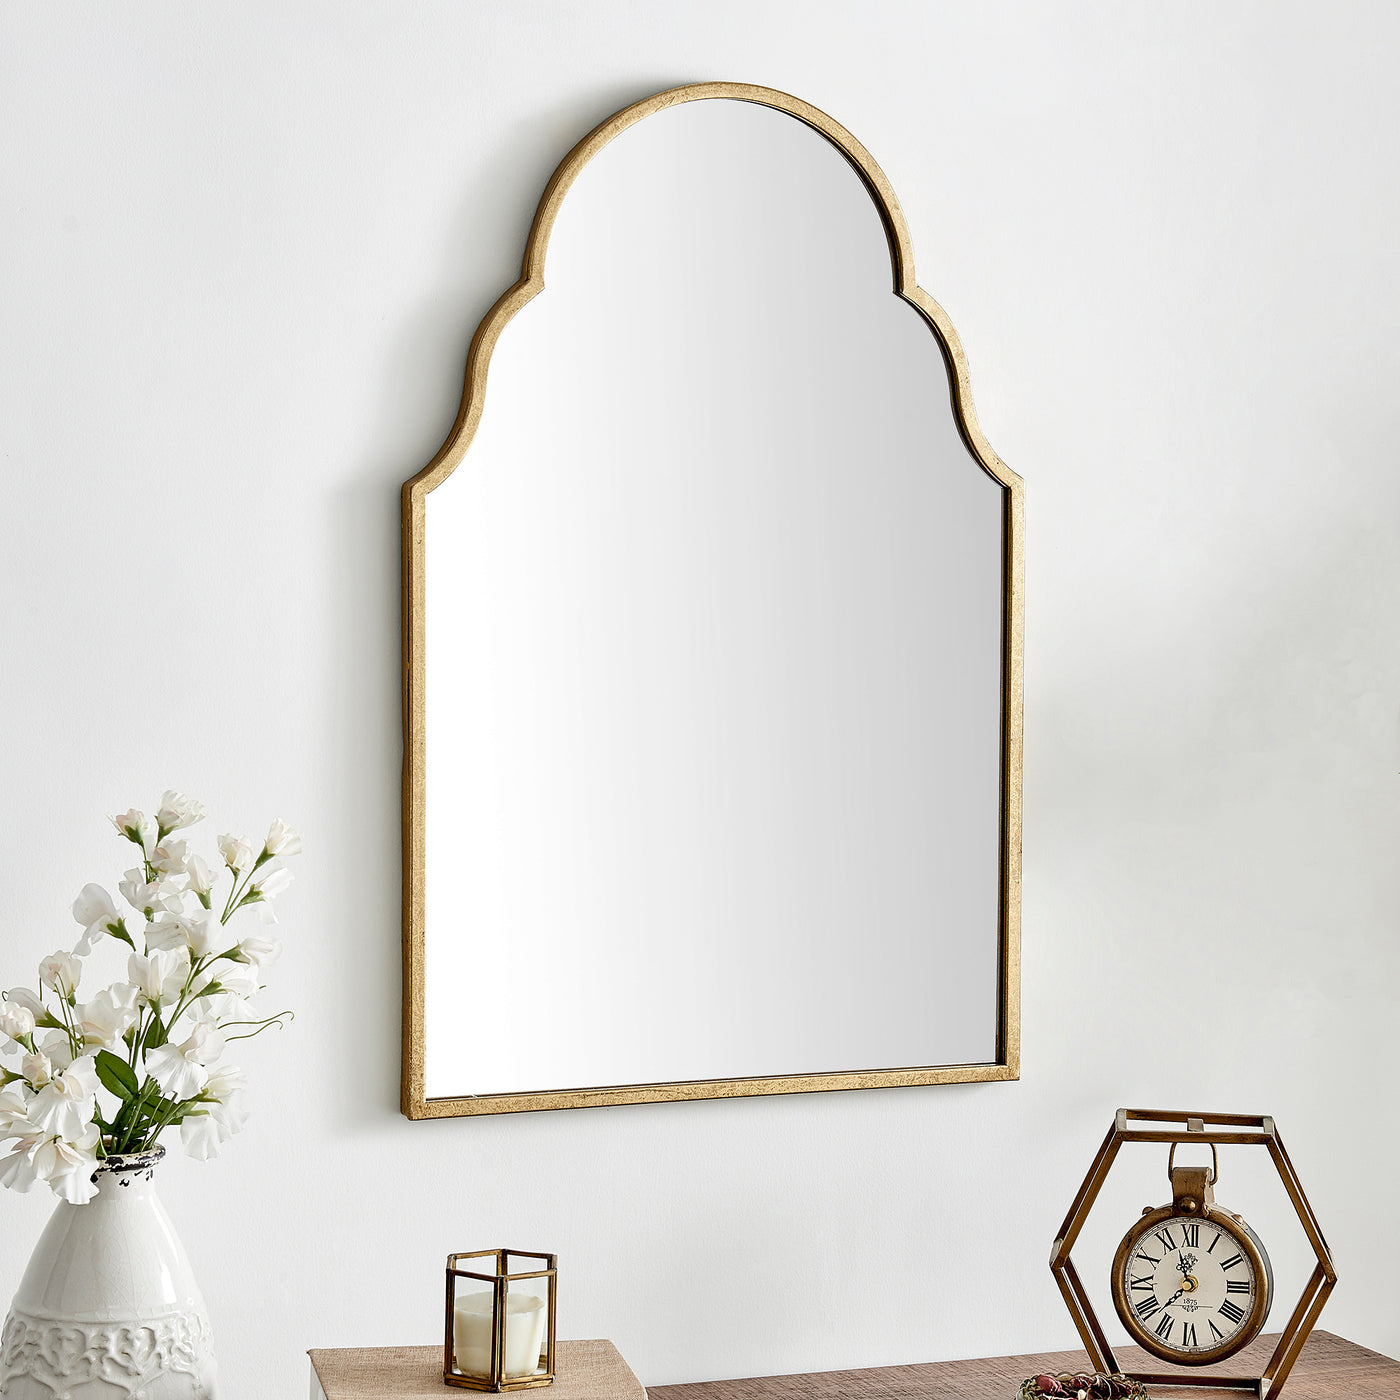 FirsTime & Co. Gold Cecily Wall Mirror, Modern Style, Made of Metal